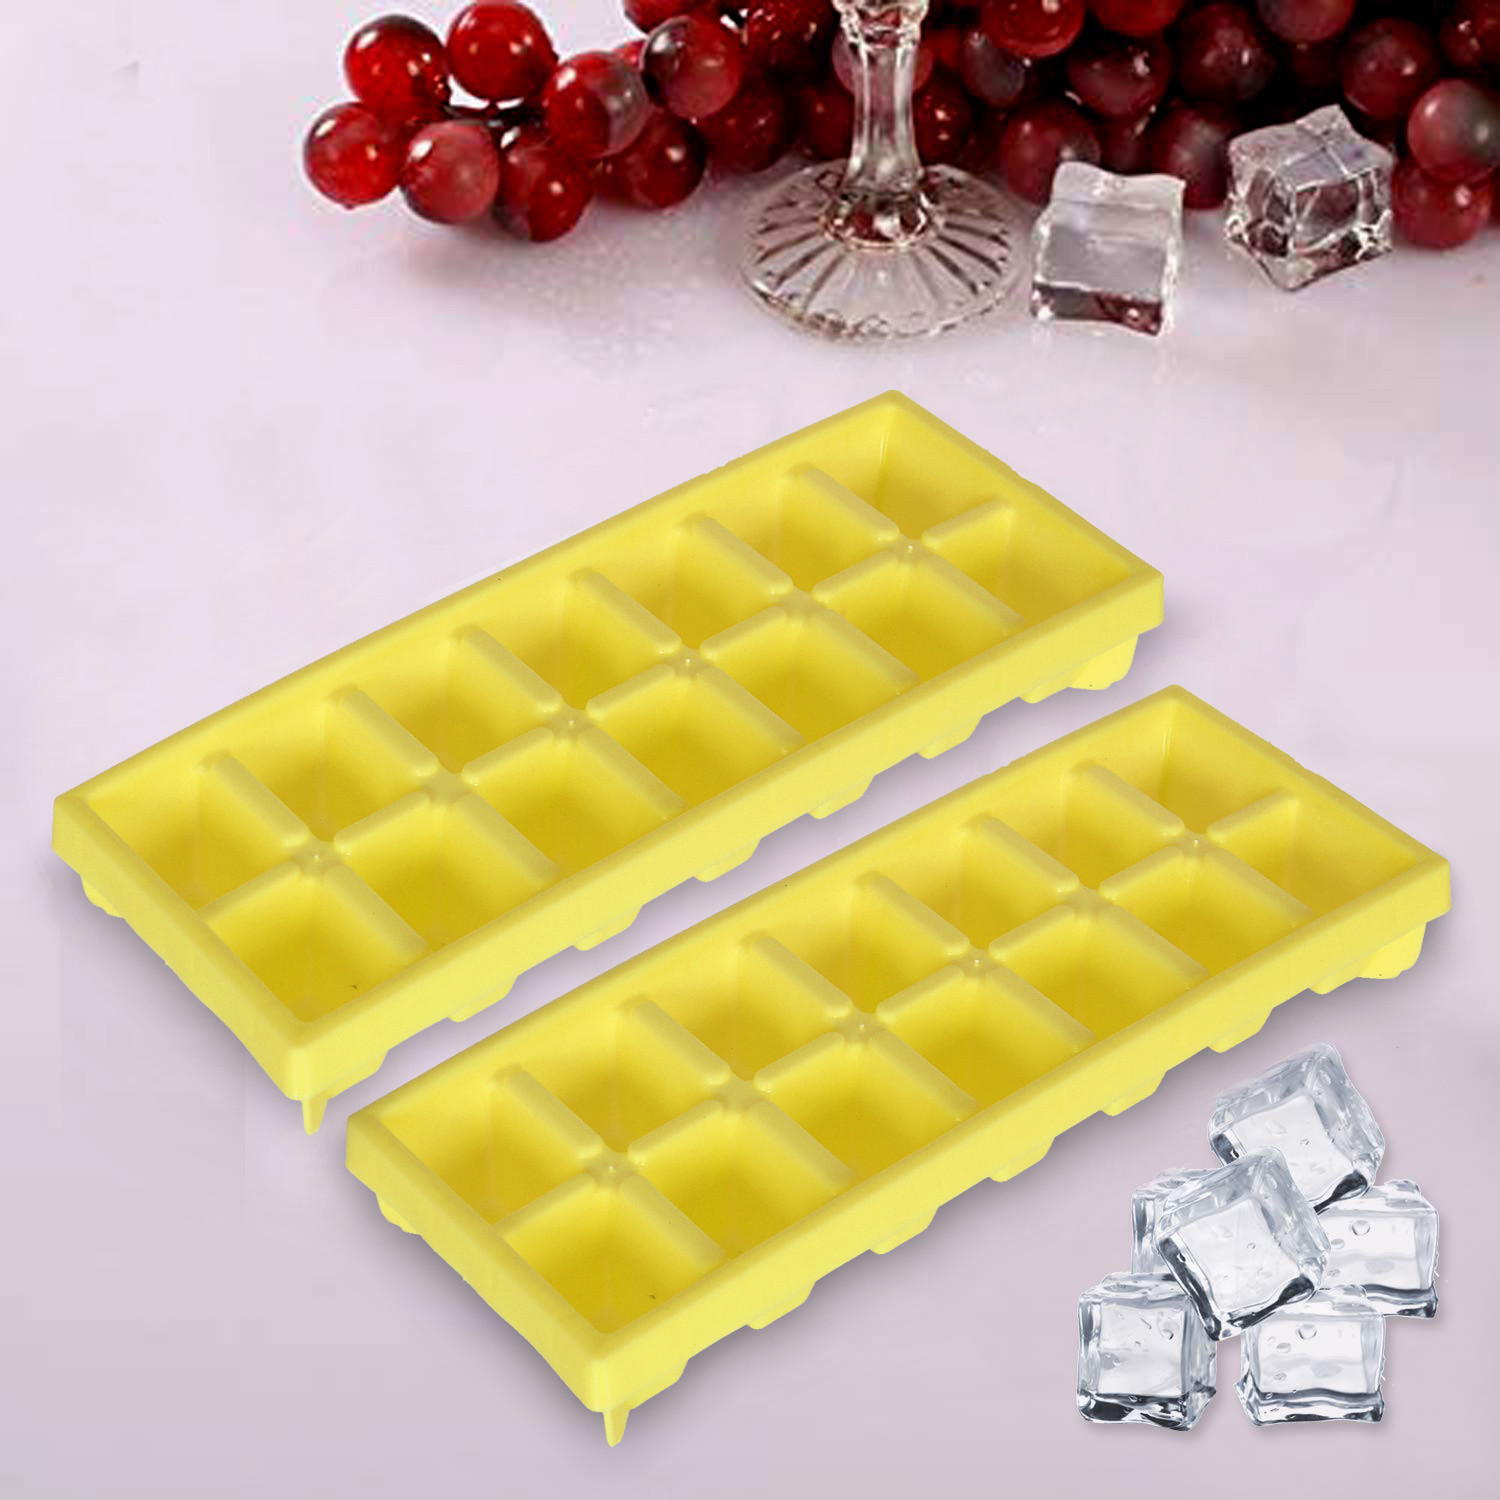 Kuber Industries Easy Release Ice Cube Tray Set - Durable Plastic Stackable Easy Twist 14 Cube Trays- Pack of 6 (Green & Yellow & White)